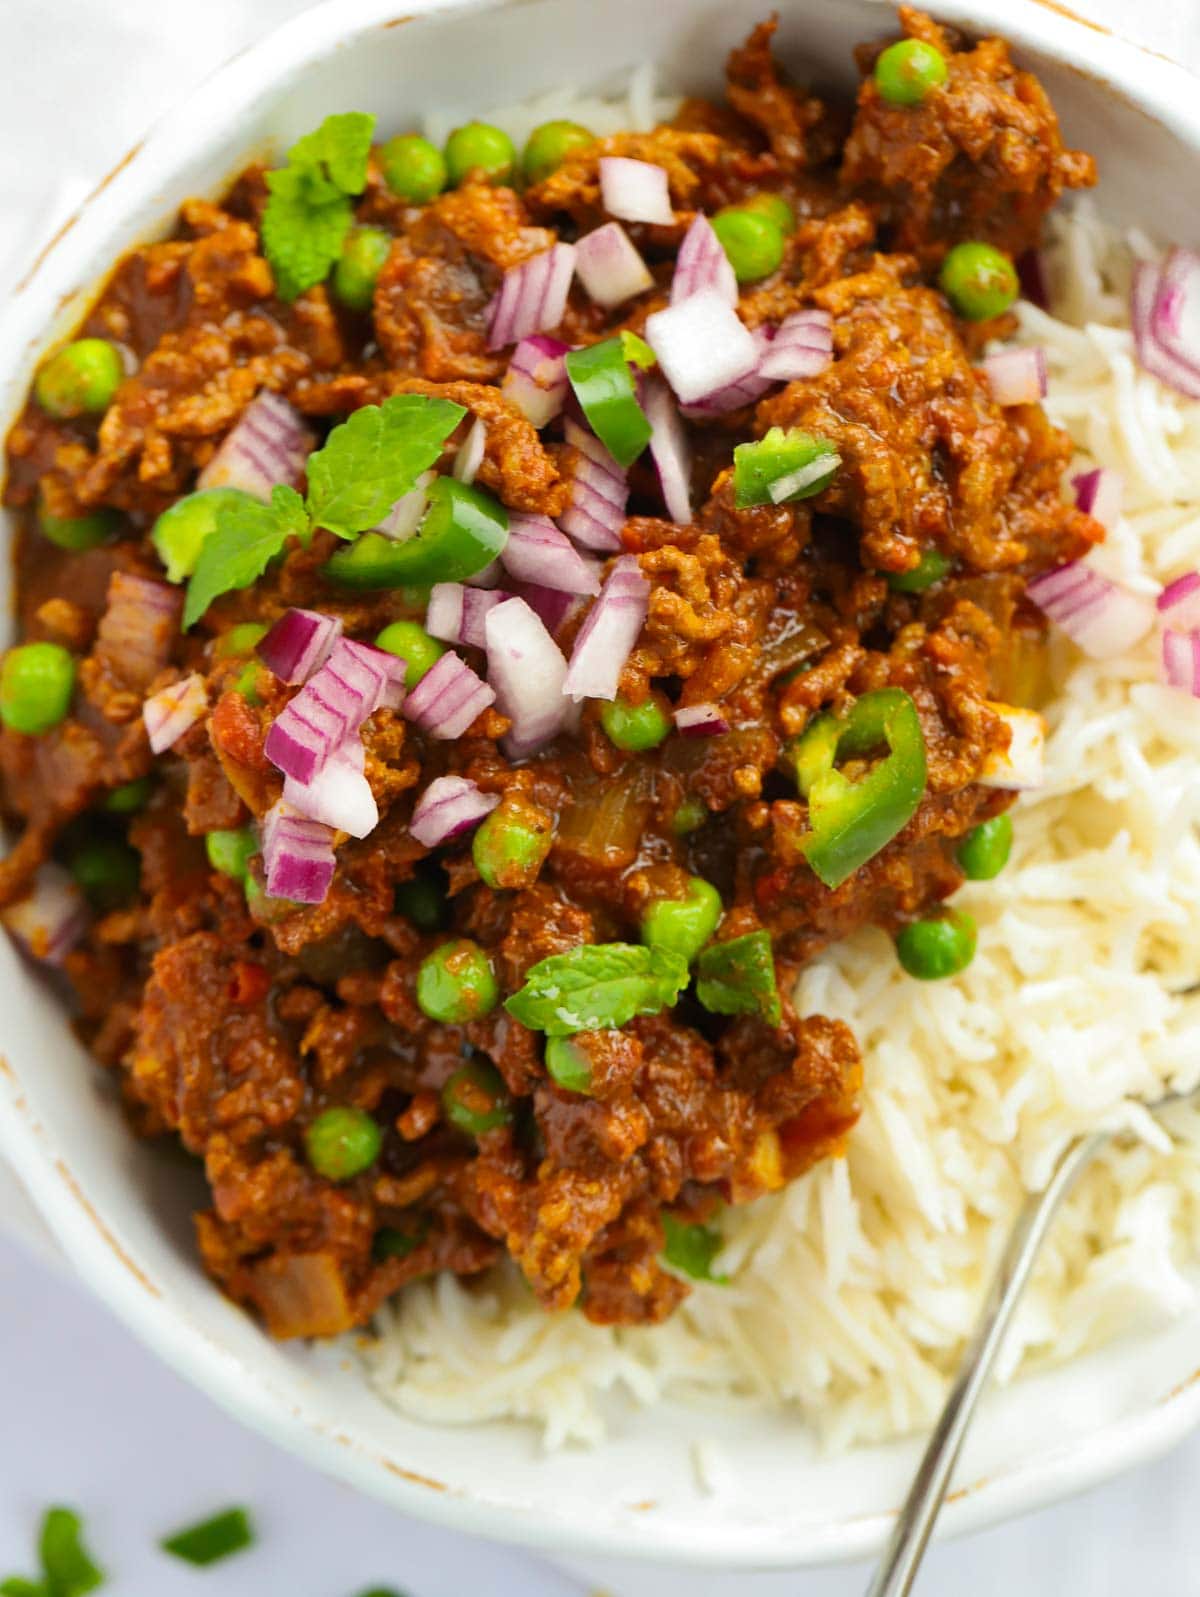 Mince Beef Curry recipe with peas and rice